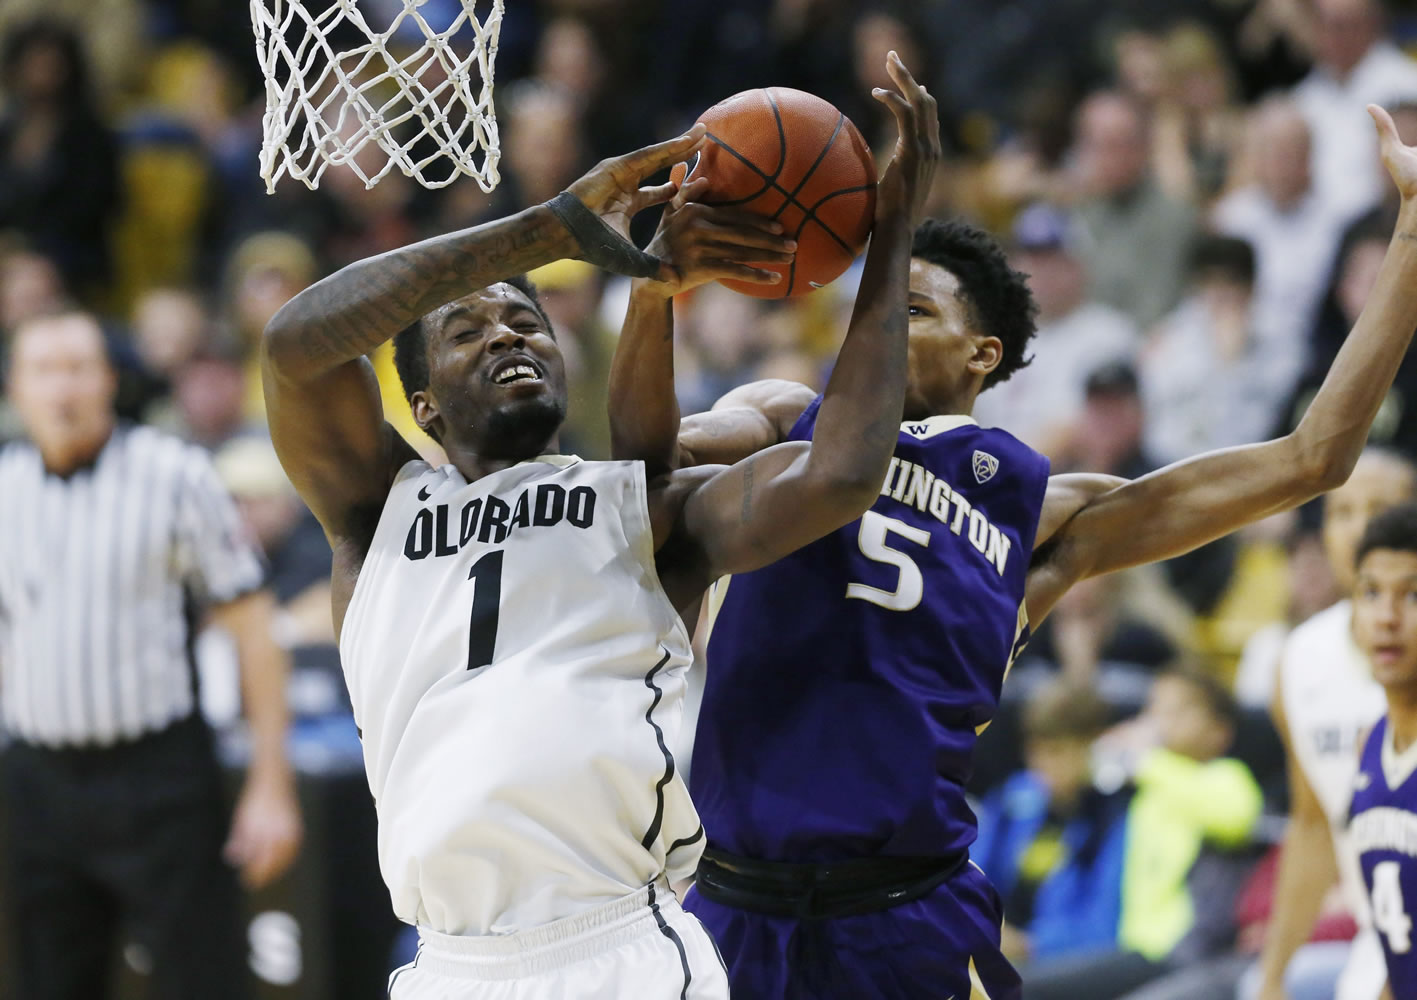 Colorado forward Wesley Gordon, left, fights for a rebound with Washington guard Dejounte Murray in the second half of an NCAA college basketball game Saturday, Feb. 13, 2016, in Boulder, Colo. Colorado won 81-80.